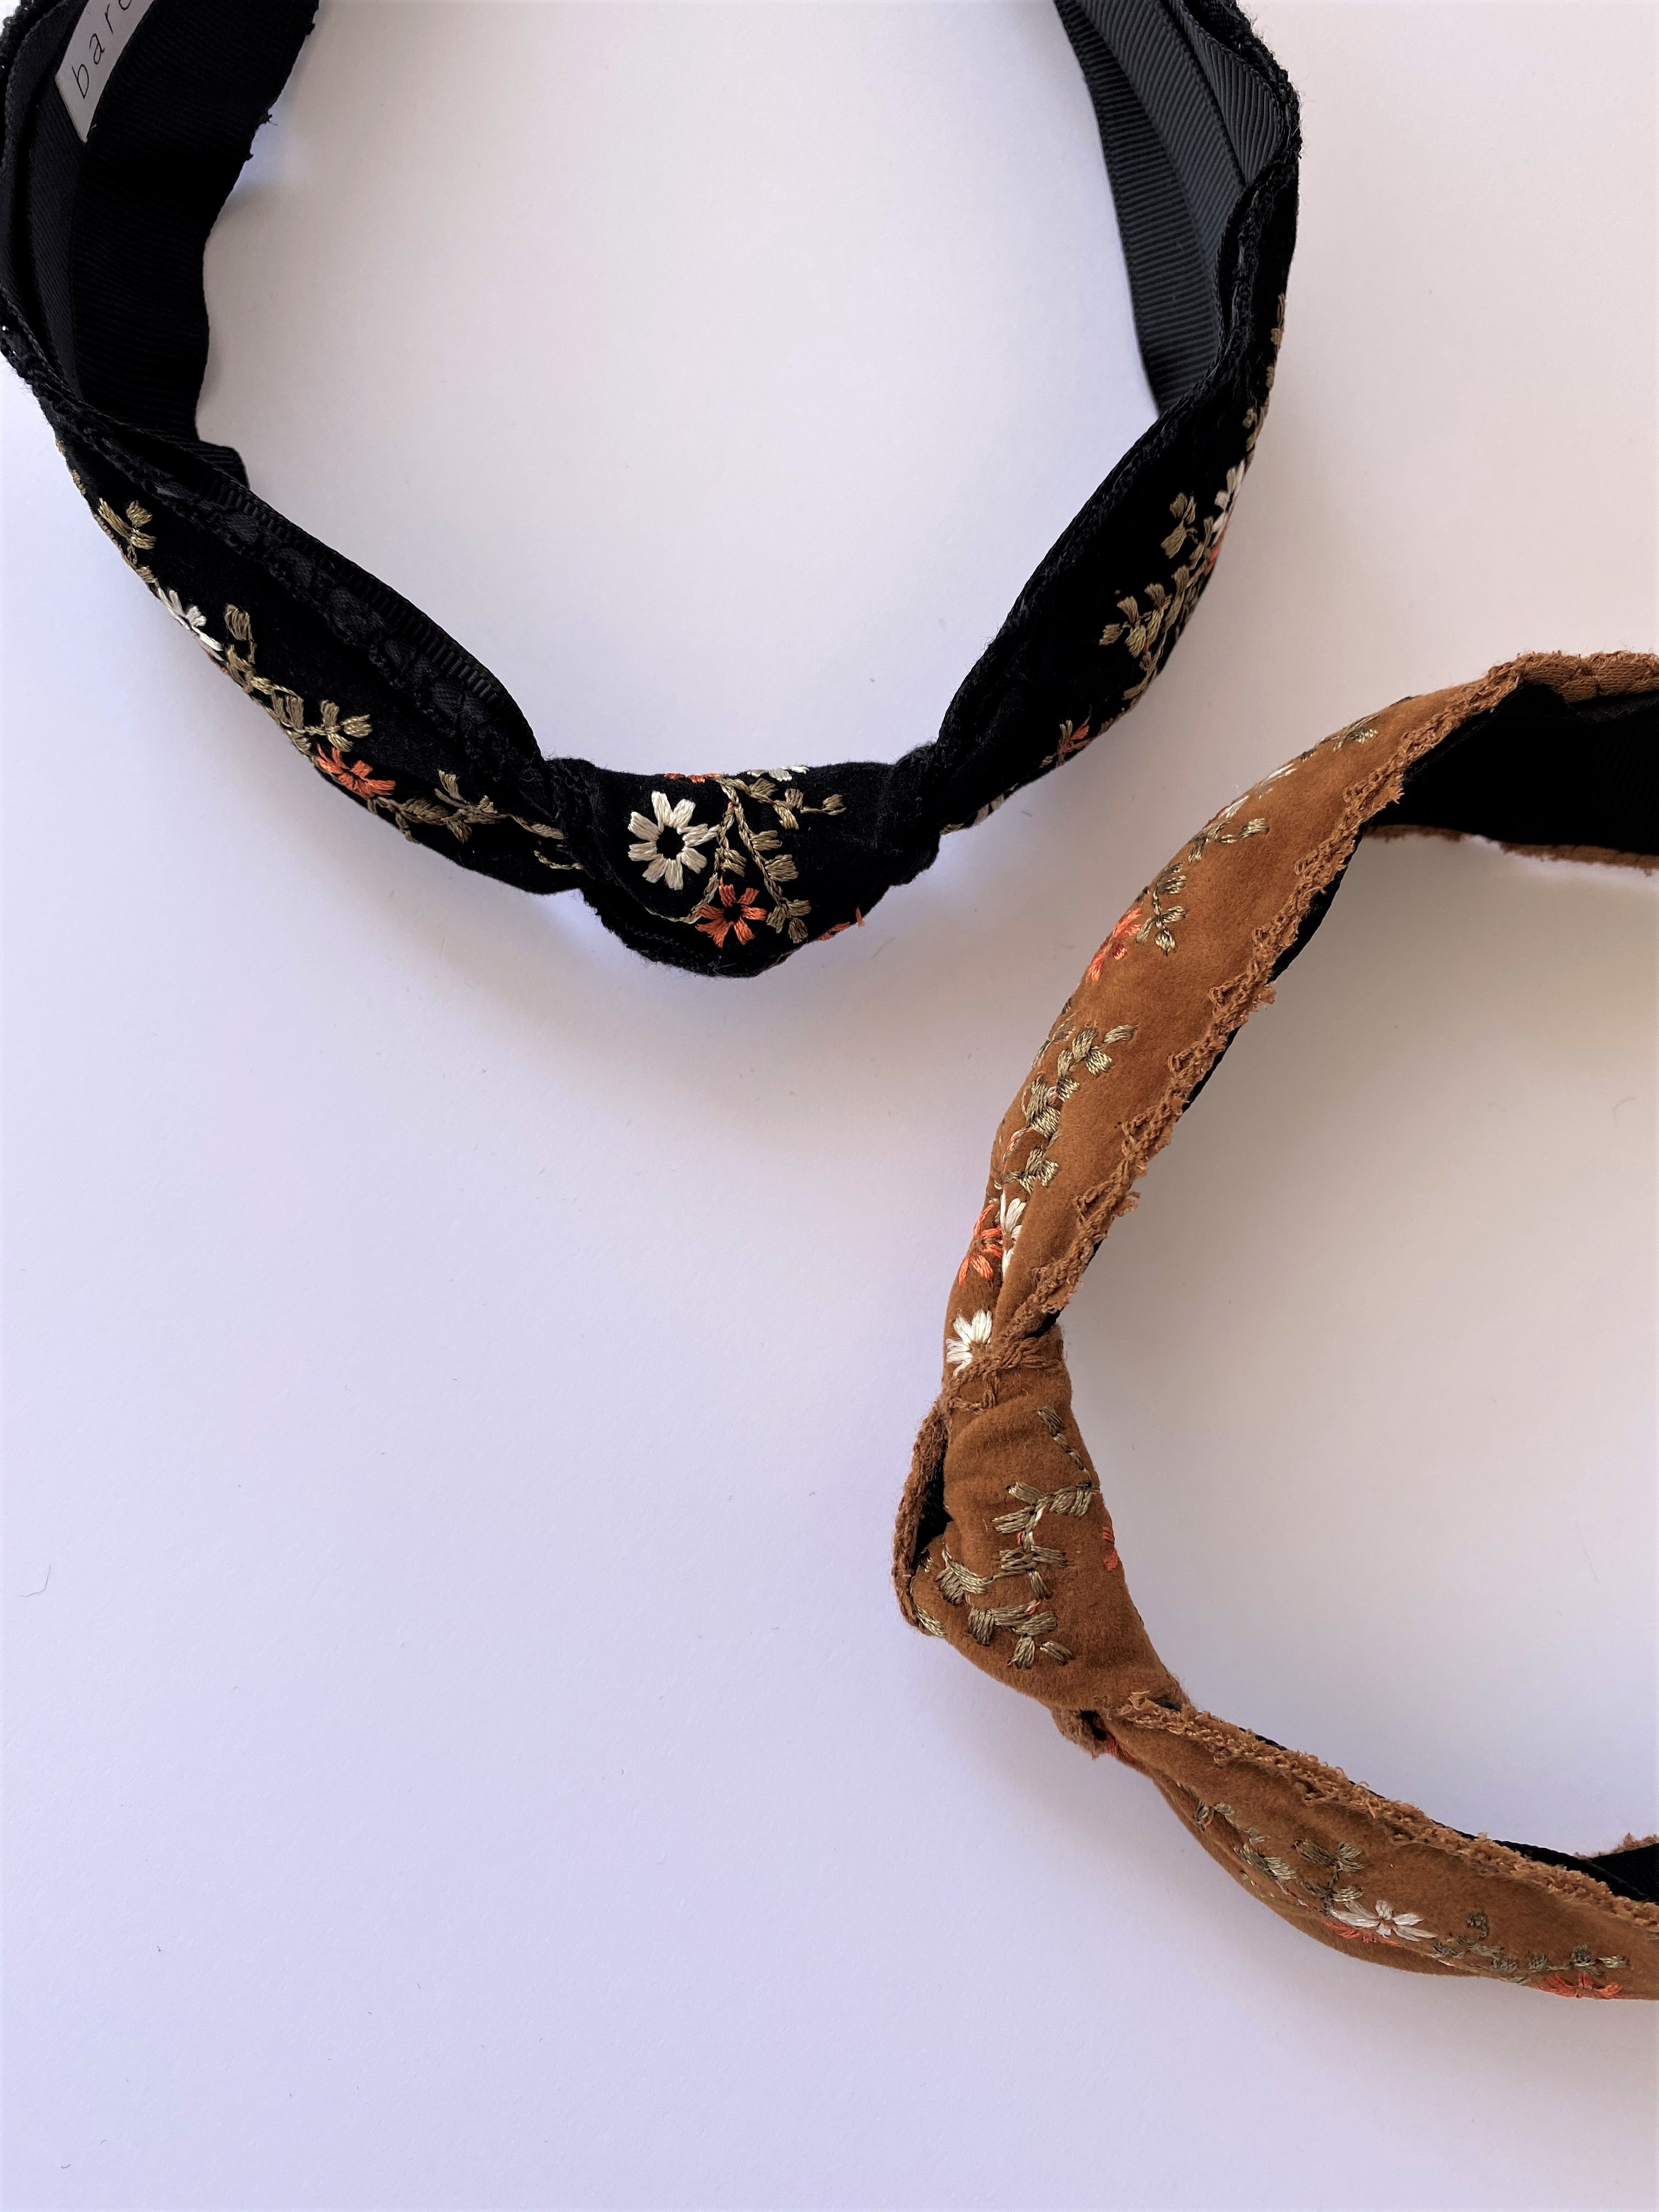 THE MOONFLOWER EMBROIDERED BANDS